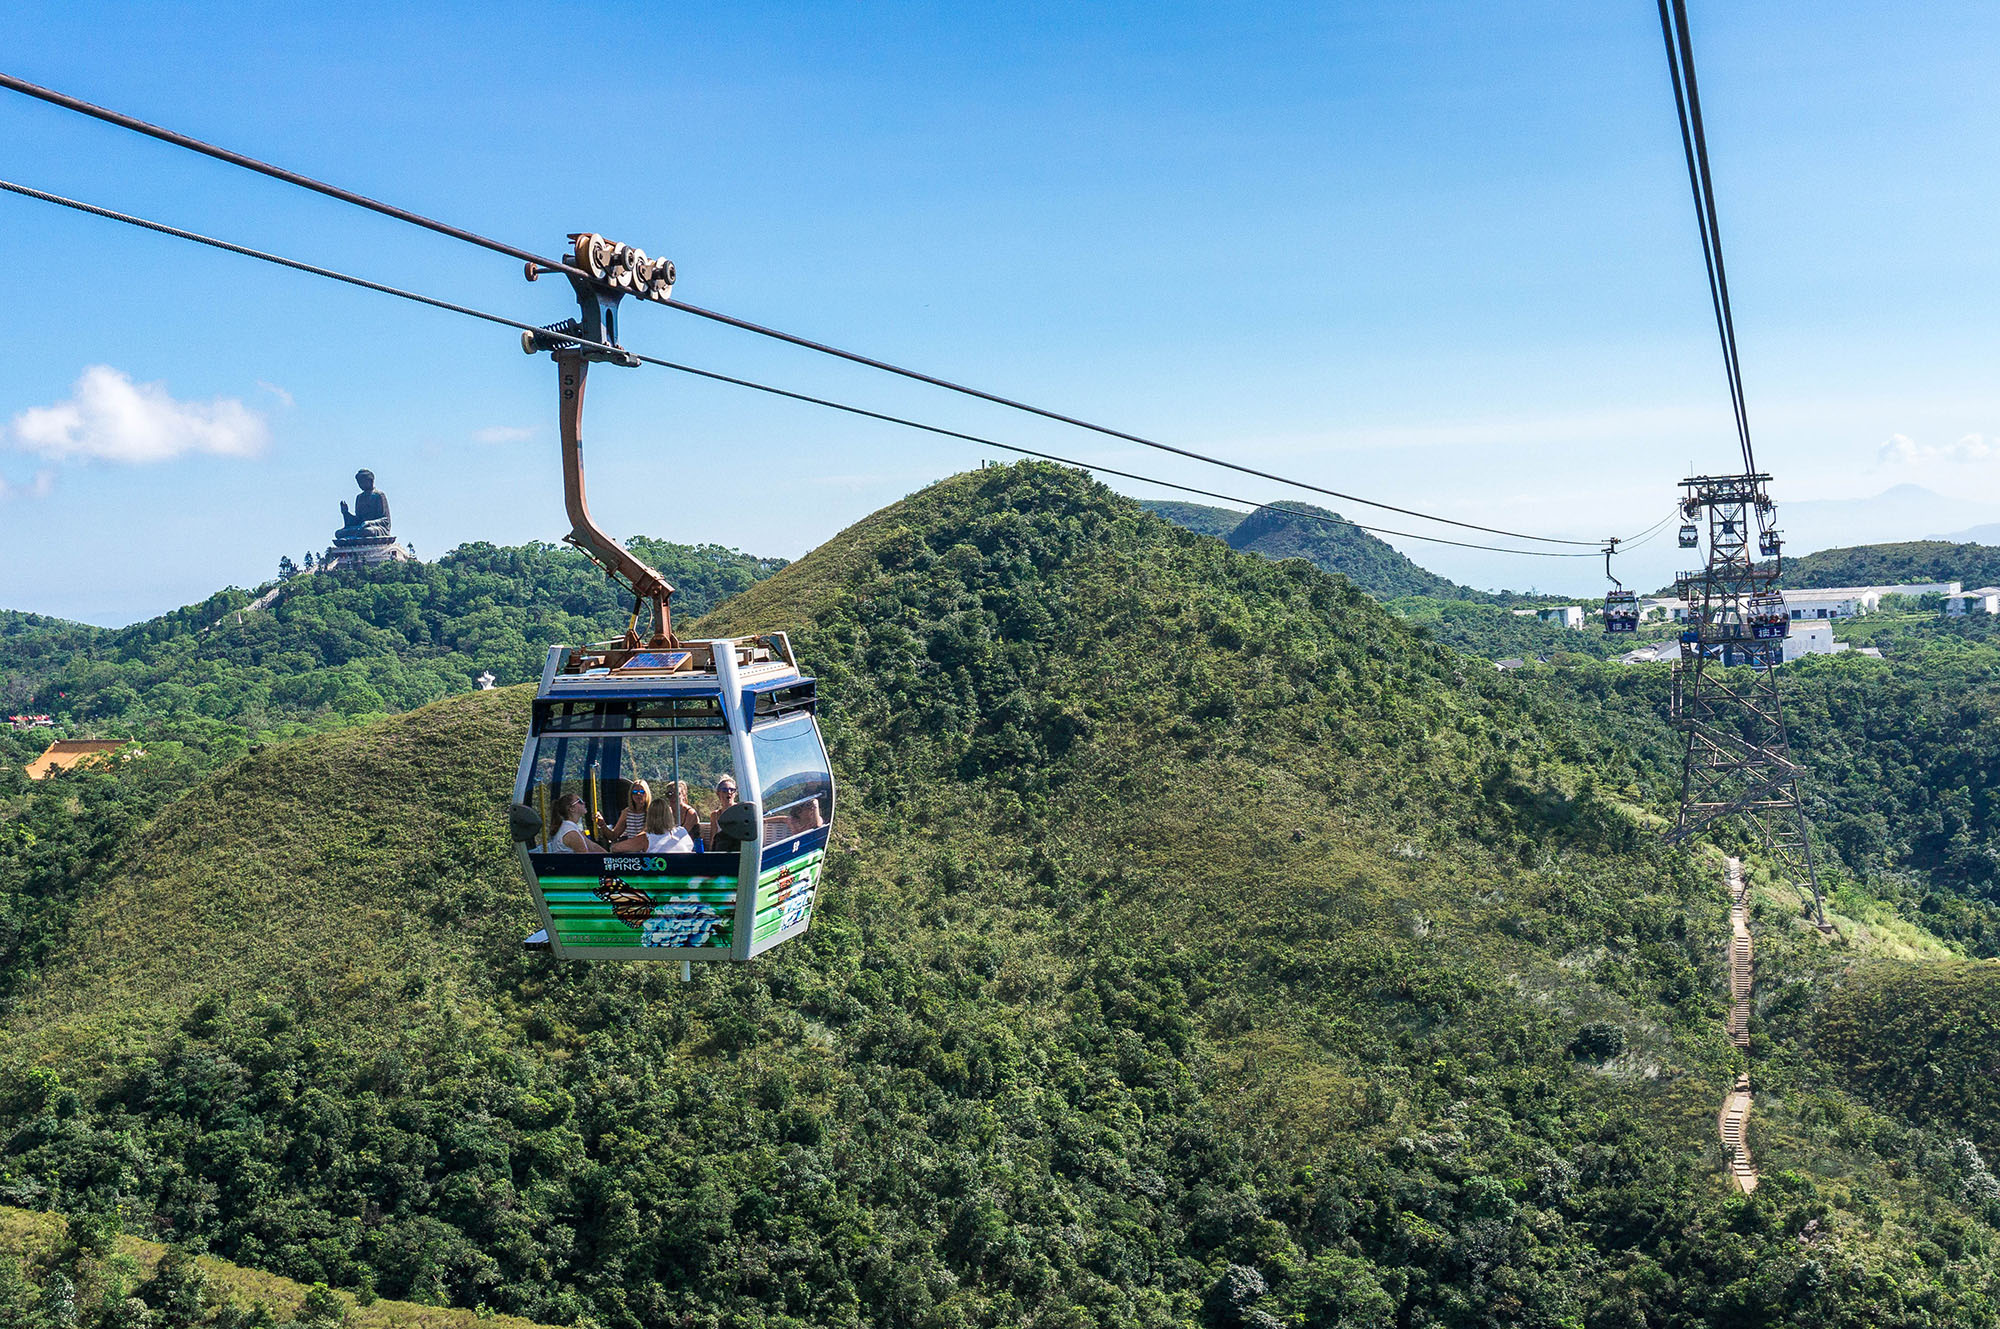 Ngong Ping Cable Car Ride Is The Longest Bi Cable Ropeway In Asia (2)